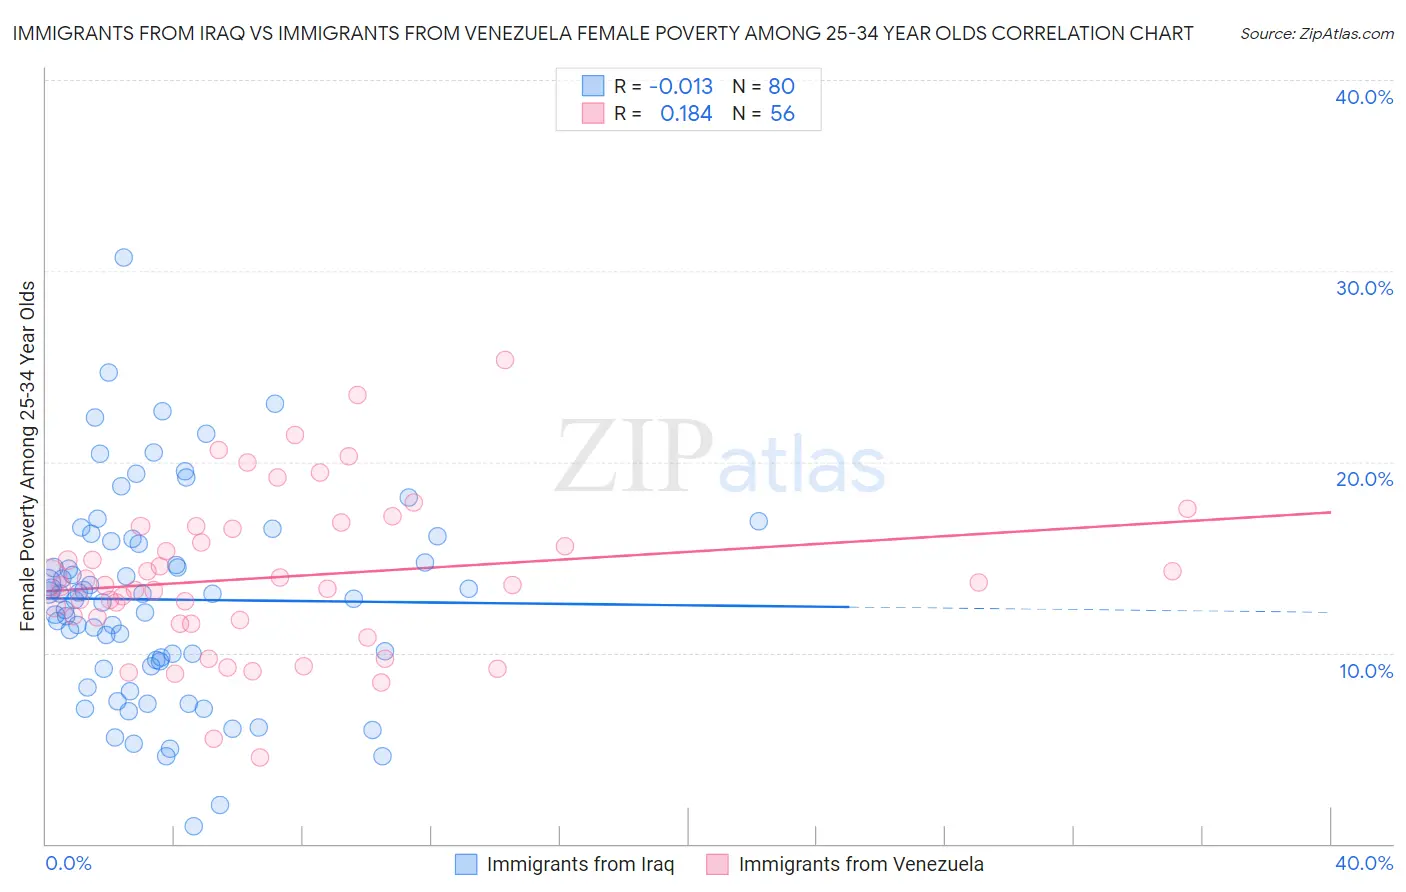 Immigrants from Iraq vs Immigrants from Venezuela Female Poverty Among 25-34 Year Olds